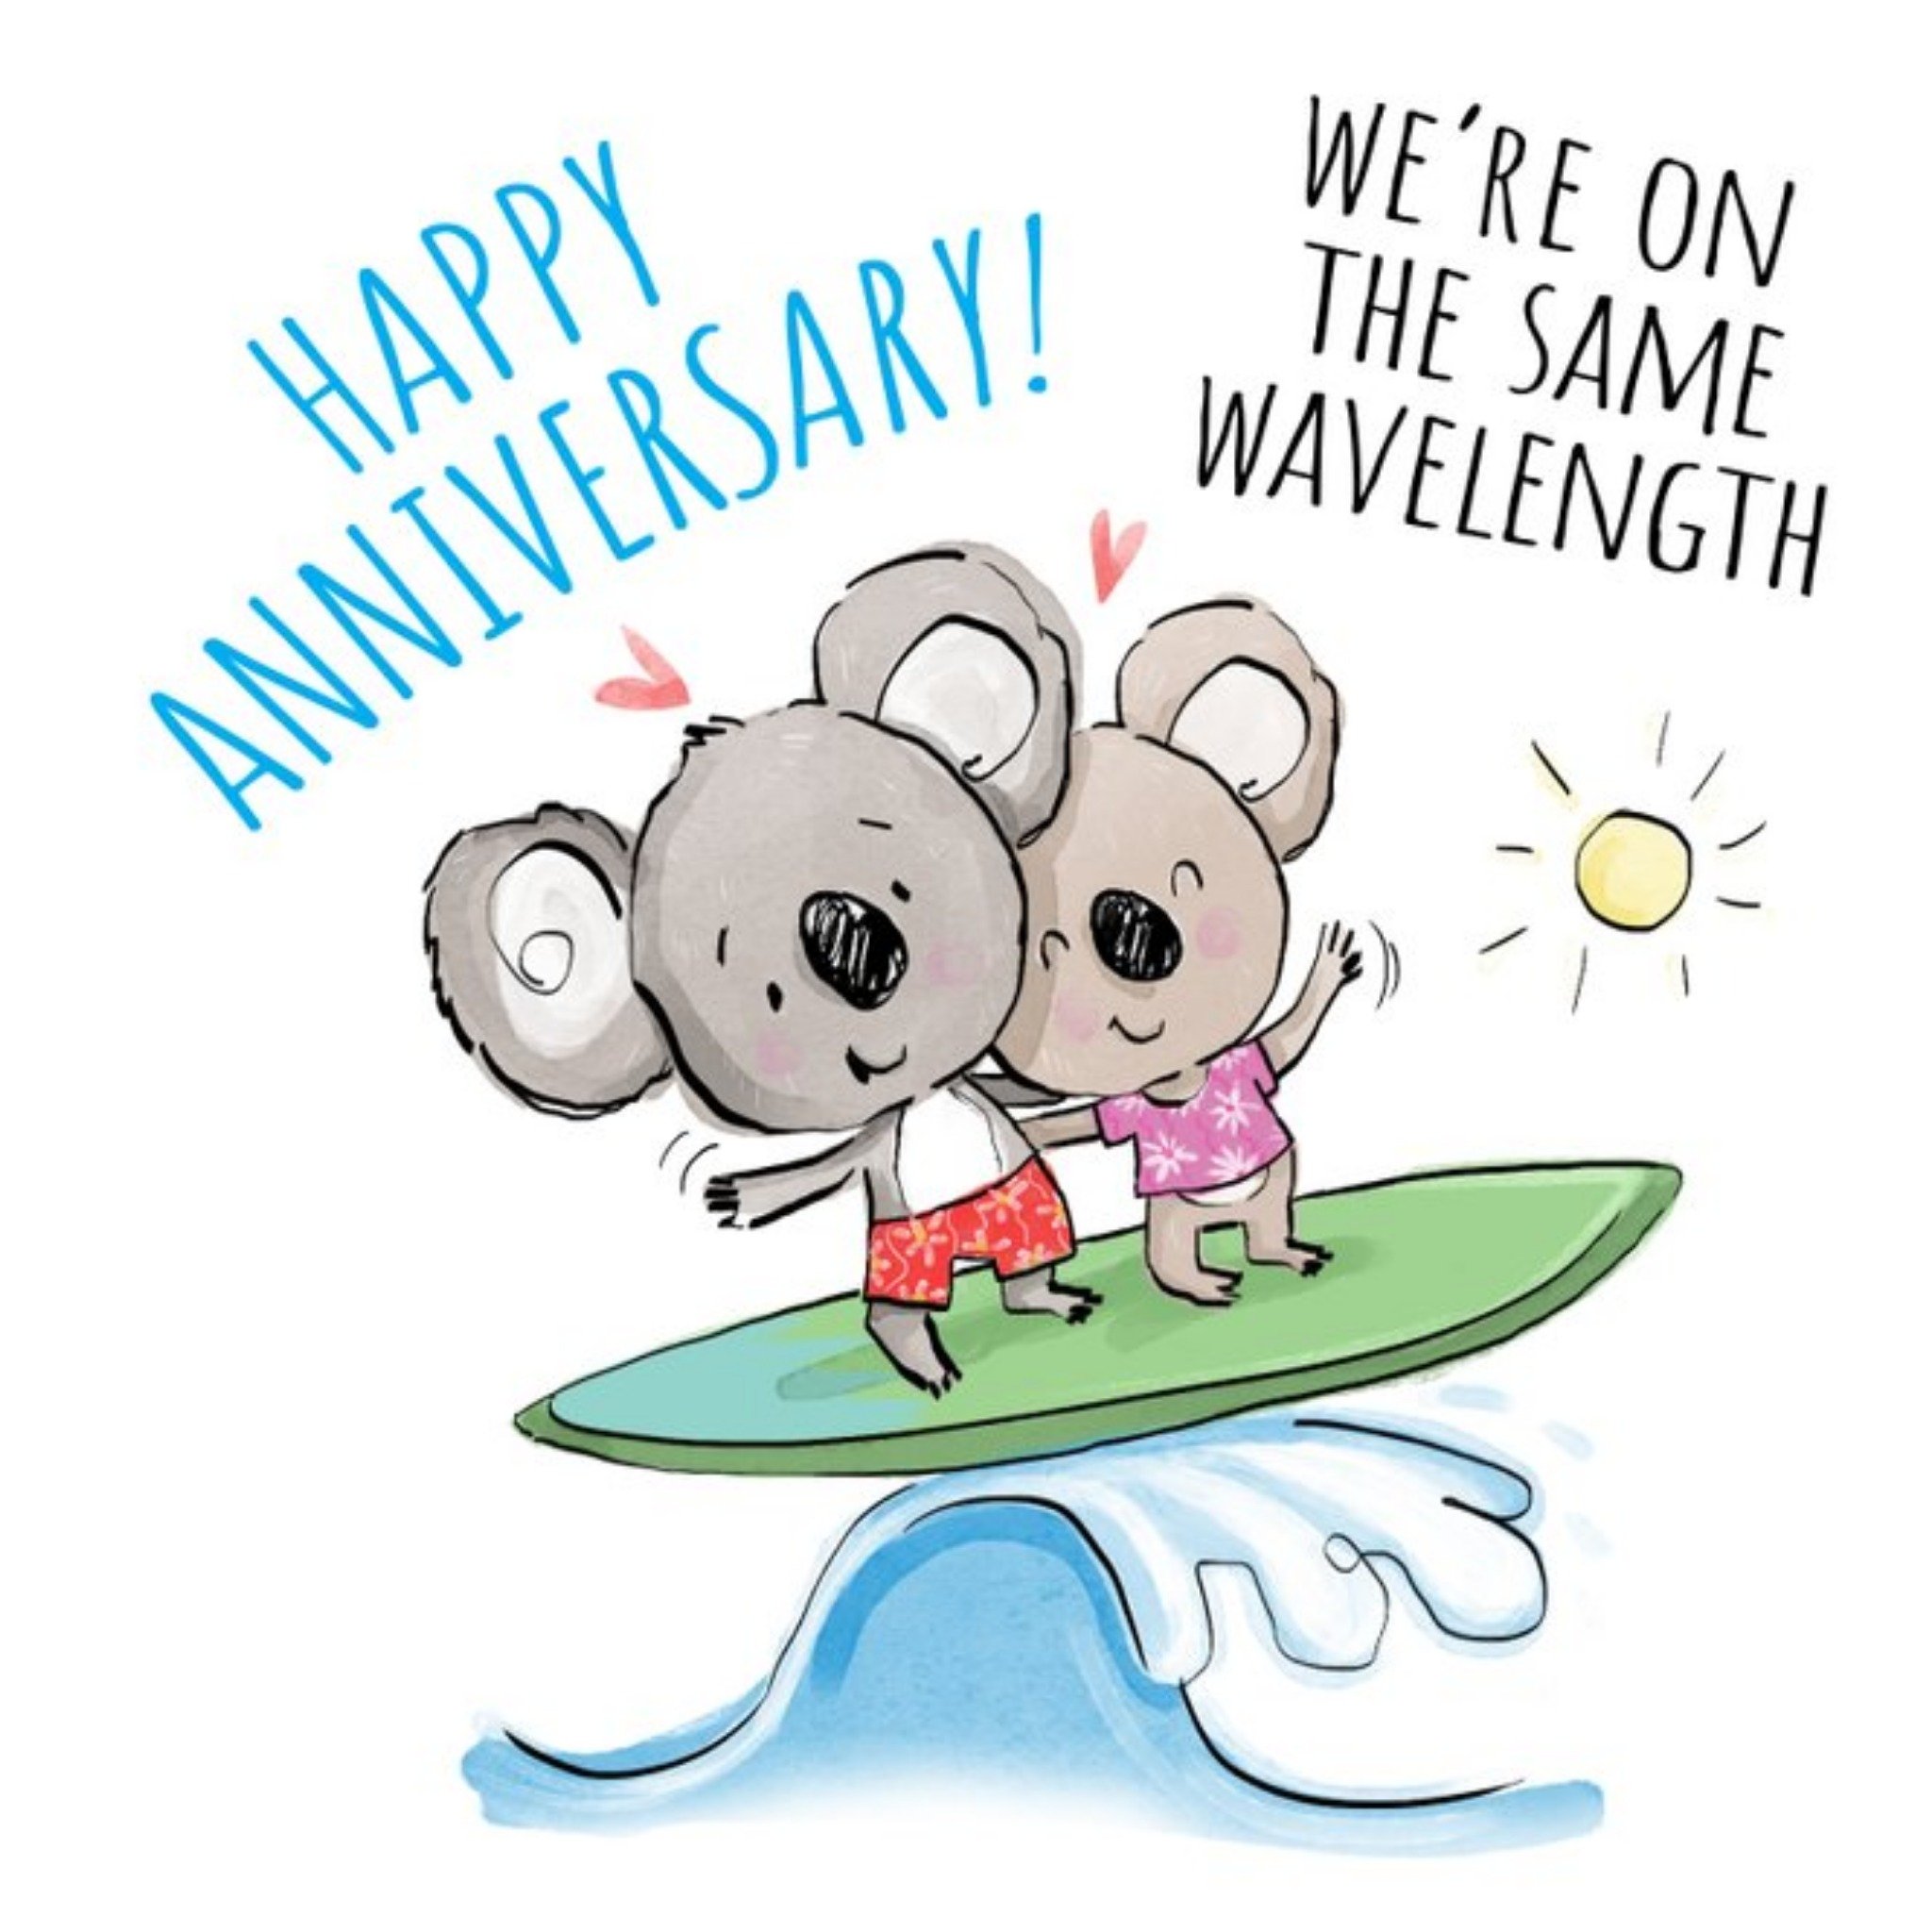 Moonpig Illustration Of Two Koalas Surfing We're On The Same Wavelength Anniversary Card, Square